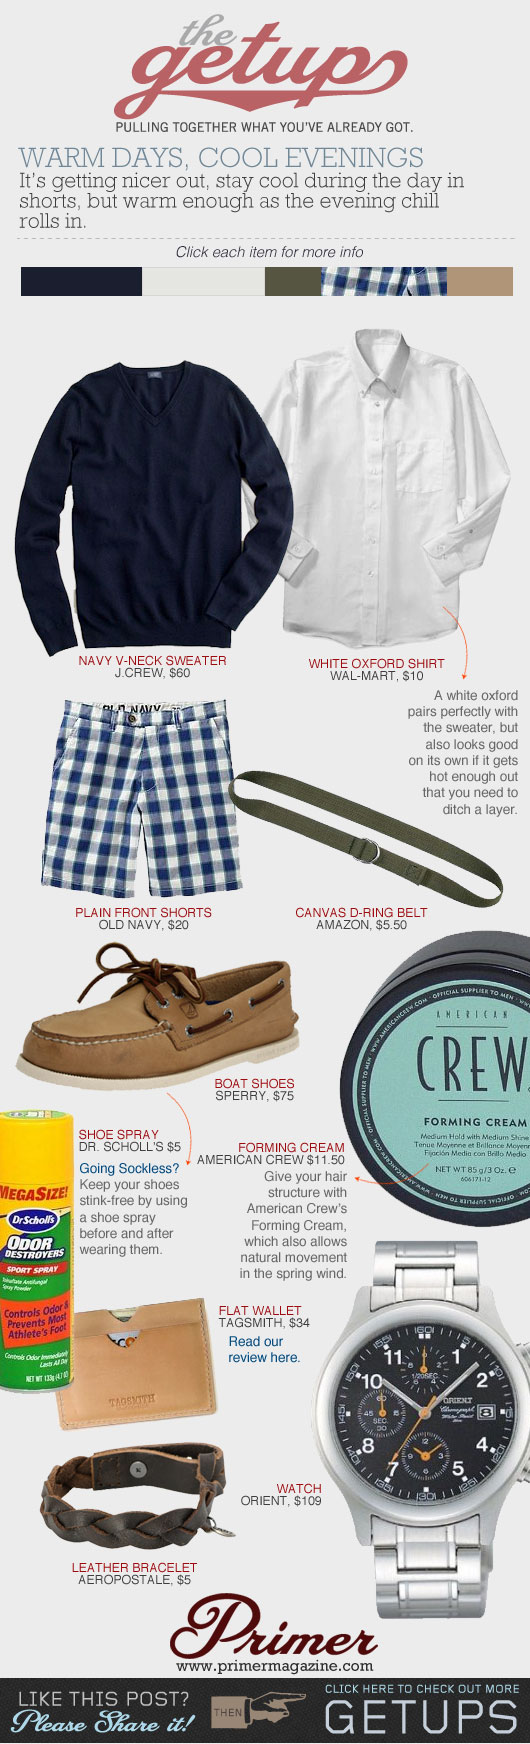 The Getup Shorts - blue sweater, white oxford, blue plaid shorts, boat shoes